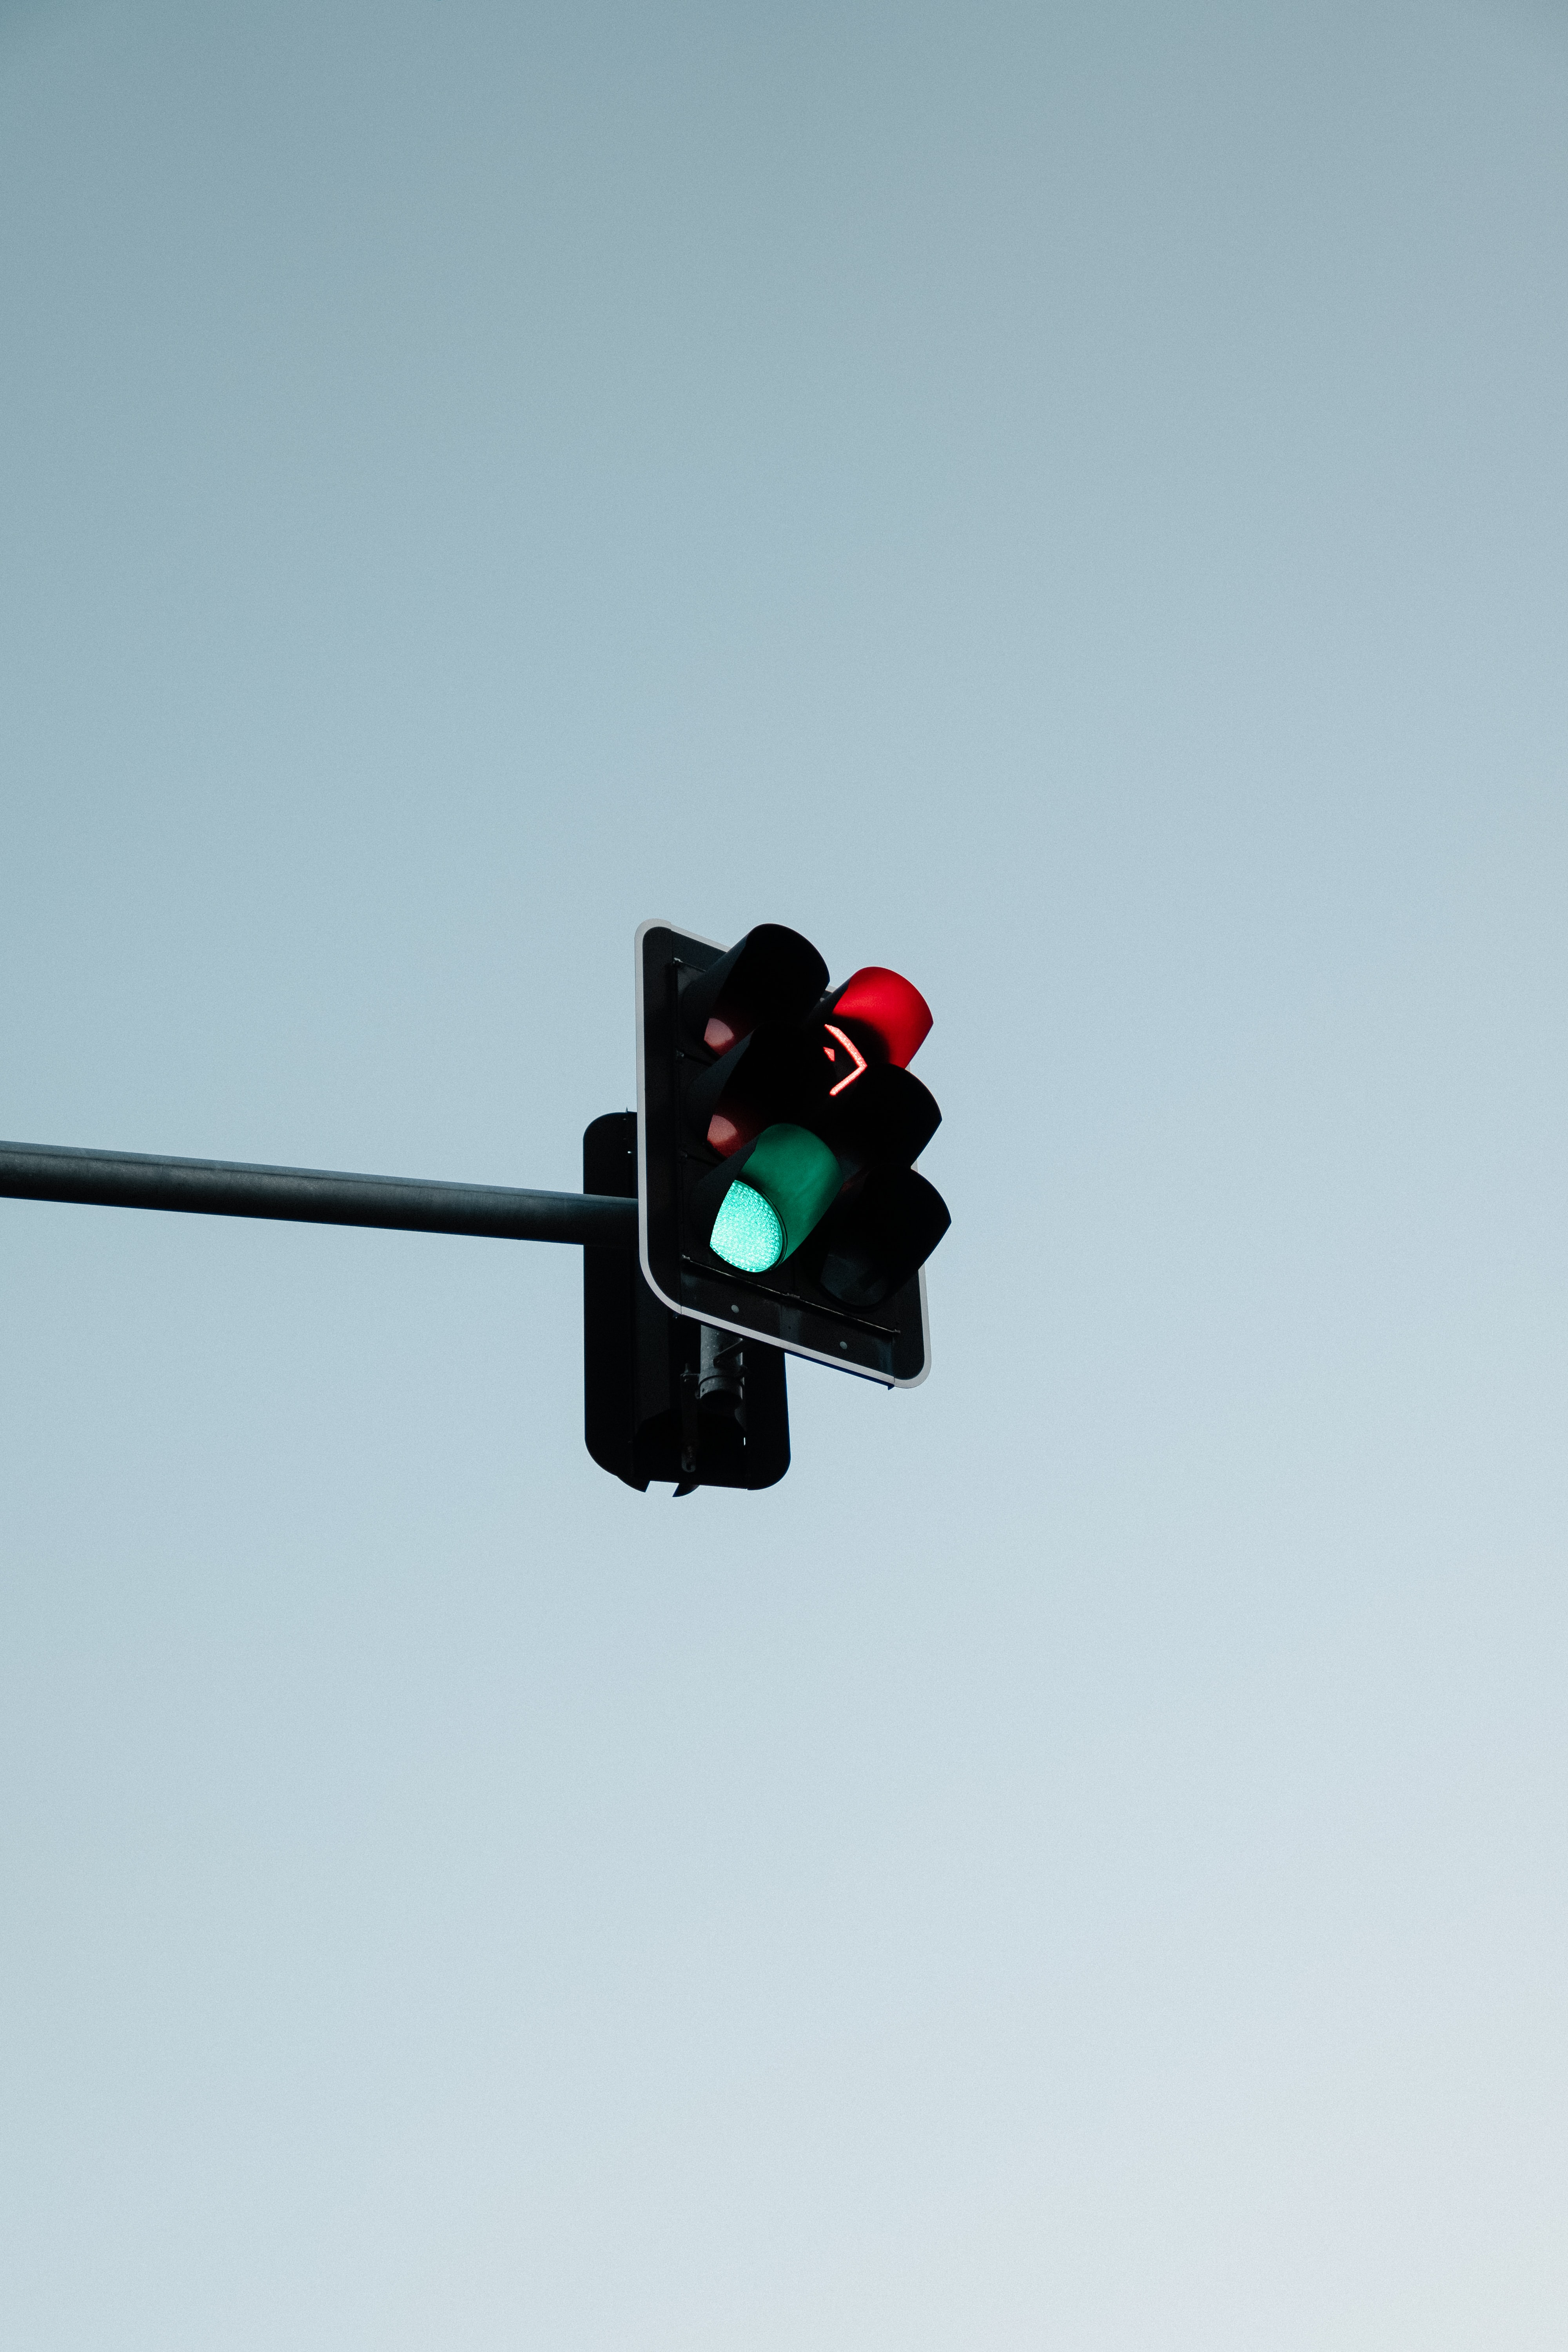 iPhone Wallpapers sky, sign, miscellanea, miscellaneous Traffic Light